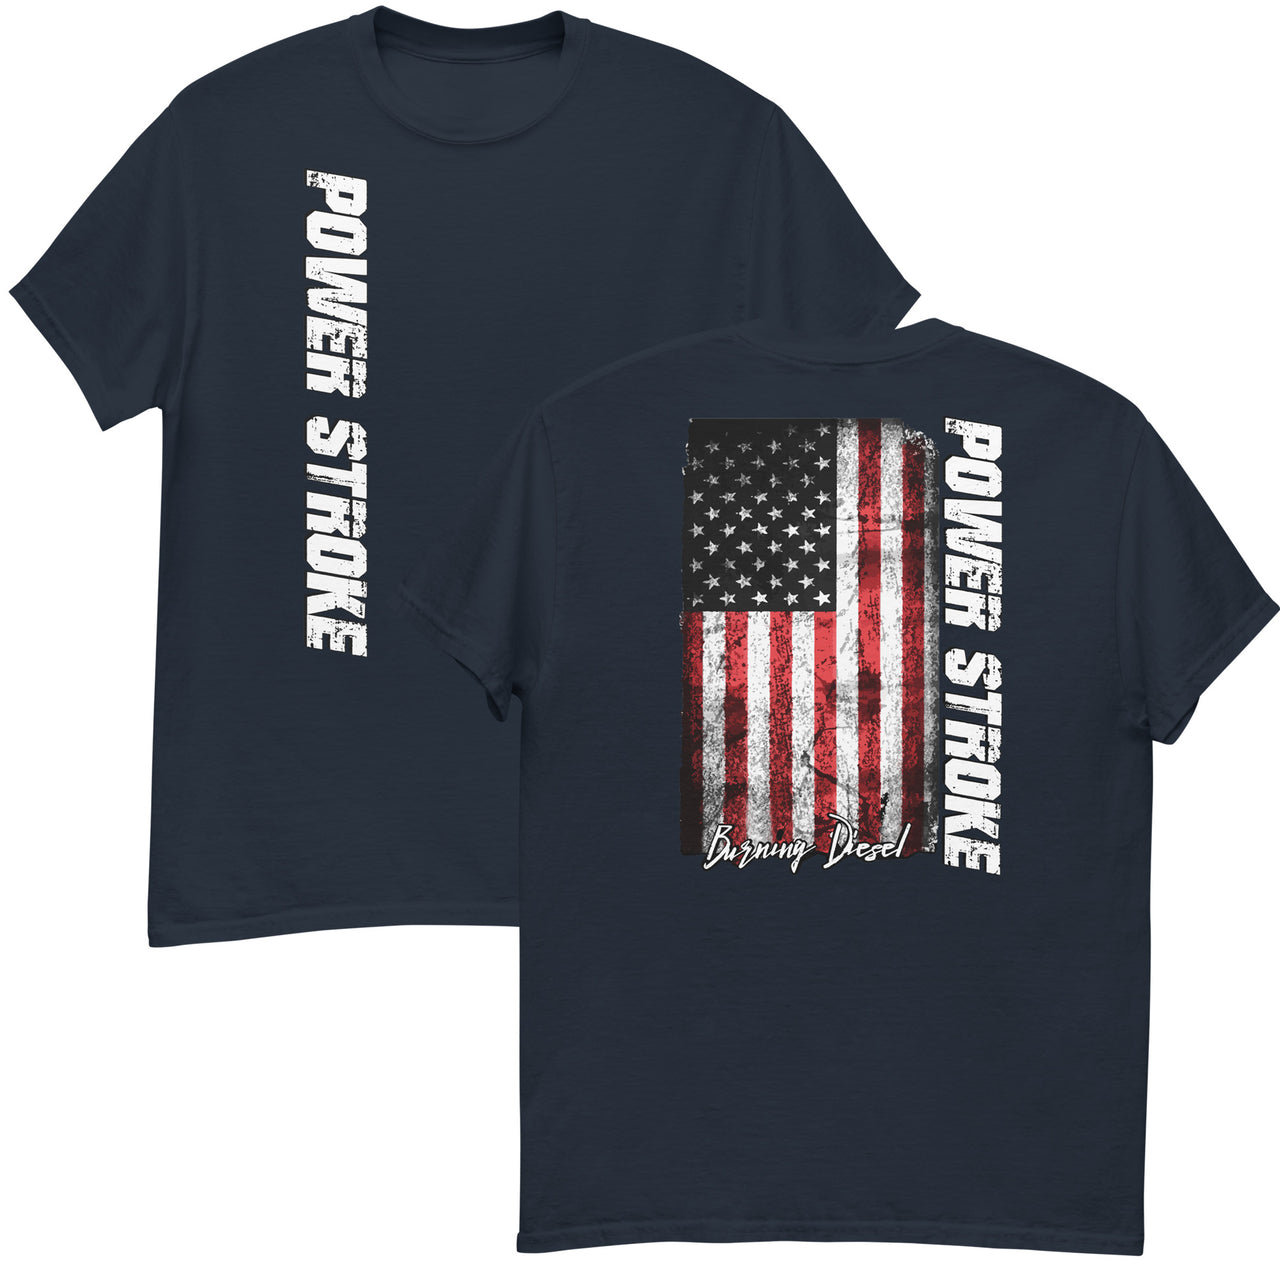 Power Stroke Diesel Shirt American Flag T-Shirt in navy from Aggressive Thread